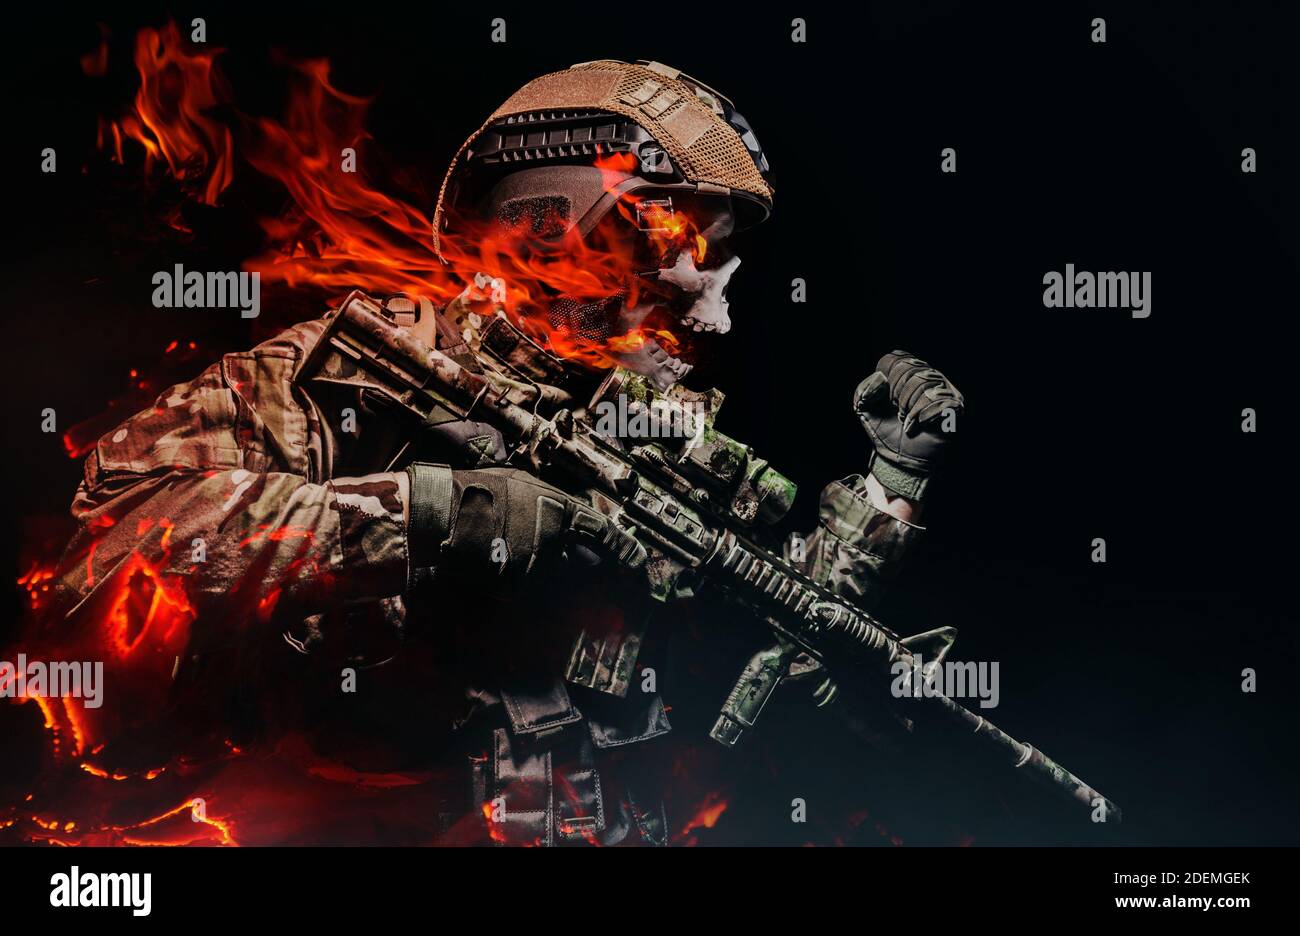 Photo of a fully equipped military burning skeleton soldier in armor vest with rifle attacking on black background Stock Photo